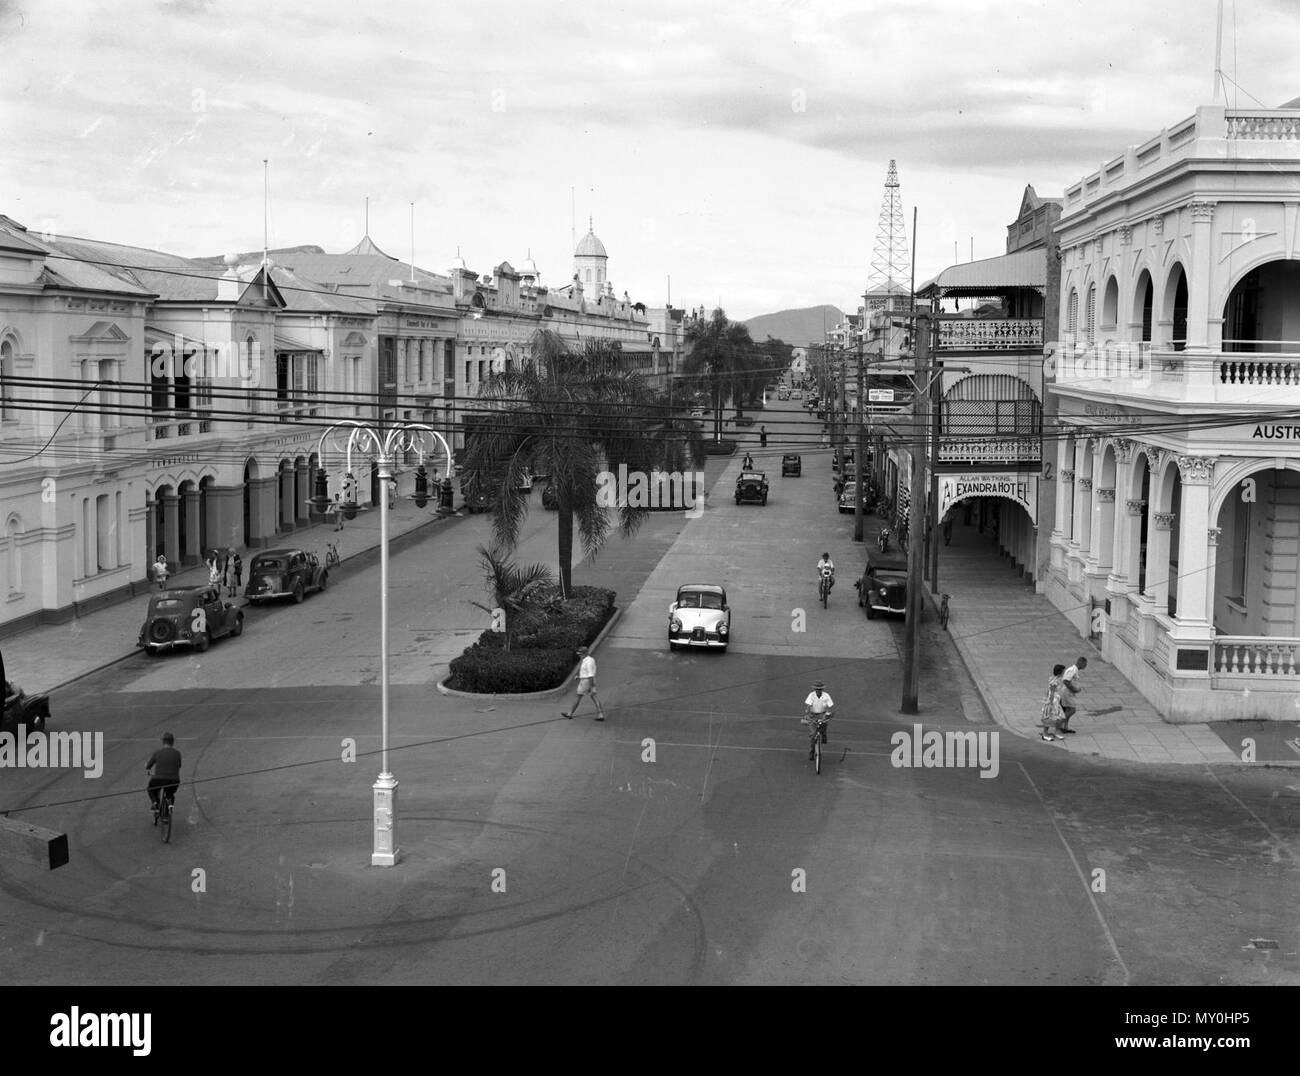 Flinders Street, Townsville, c 1953. From the Queensland Heritage Registerid=600911 ) .  The Post Office was constructed in 1886 at a cost of £17,235. Dennis Kellcher submitted a tender and carried out extensions in 1888, while a clock tower was built by Henry L Davis &amp; Co. Chimes were imported from England in 1889 and installed by 1891. As a result of severe bomb damage done to buildings in Darwin, the clocktower was dismantled in 1942 and the mechanism was stored away. A greatly modified tower was built in 1963-64 by JE Allen &amp; Co. of Townsville at a cost of £42,135. The interior was Stock Photo